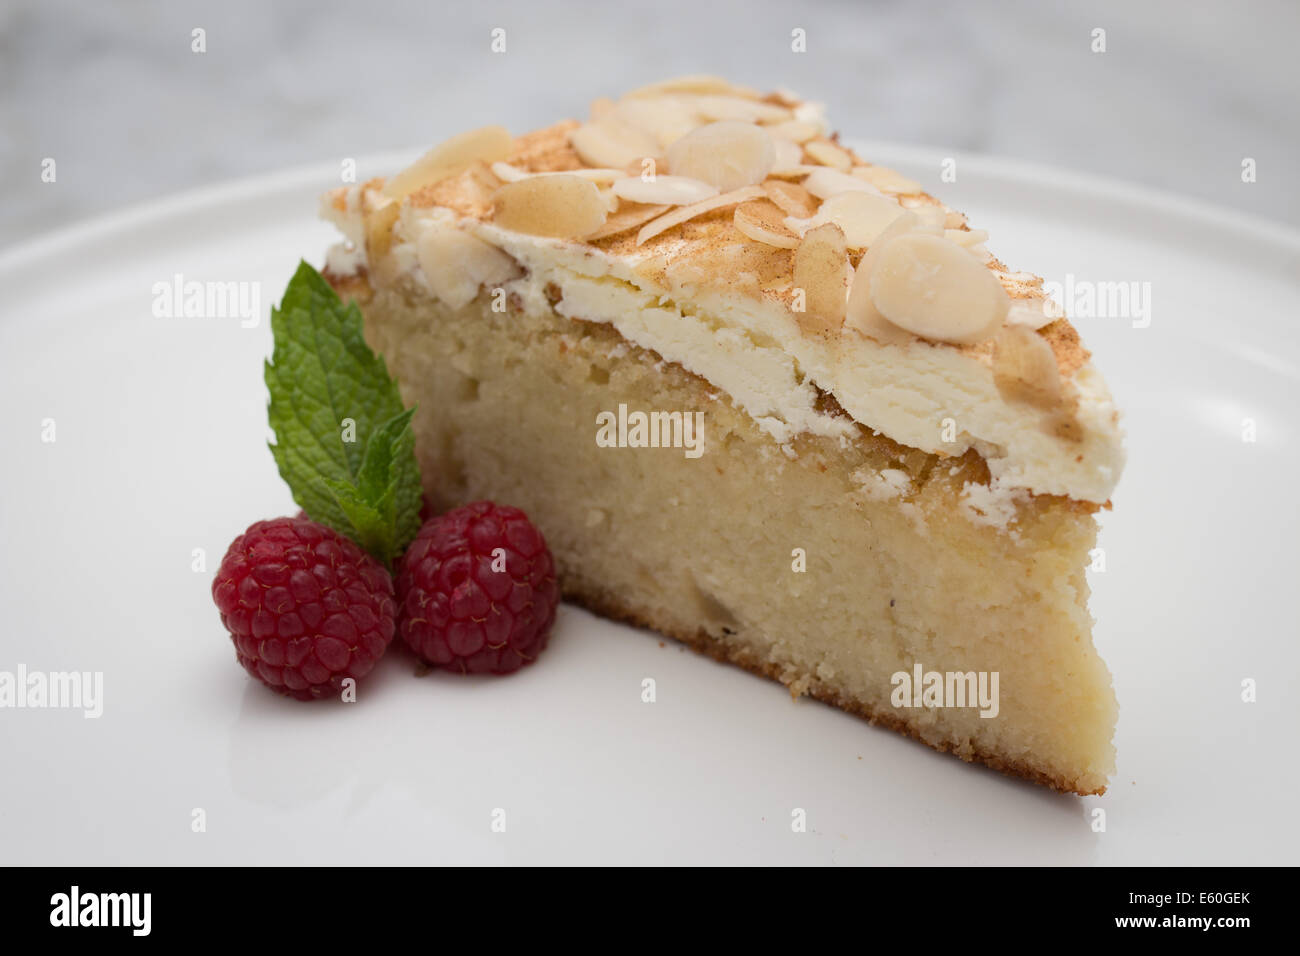 A slice of gluten free almond cake dressed with raspberries and mint Stock Photo